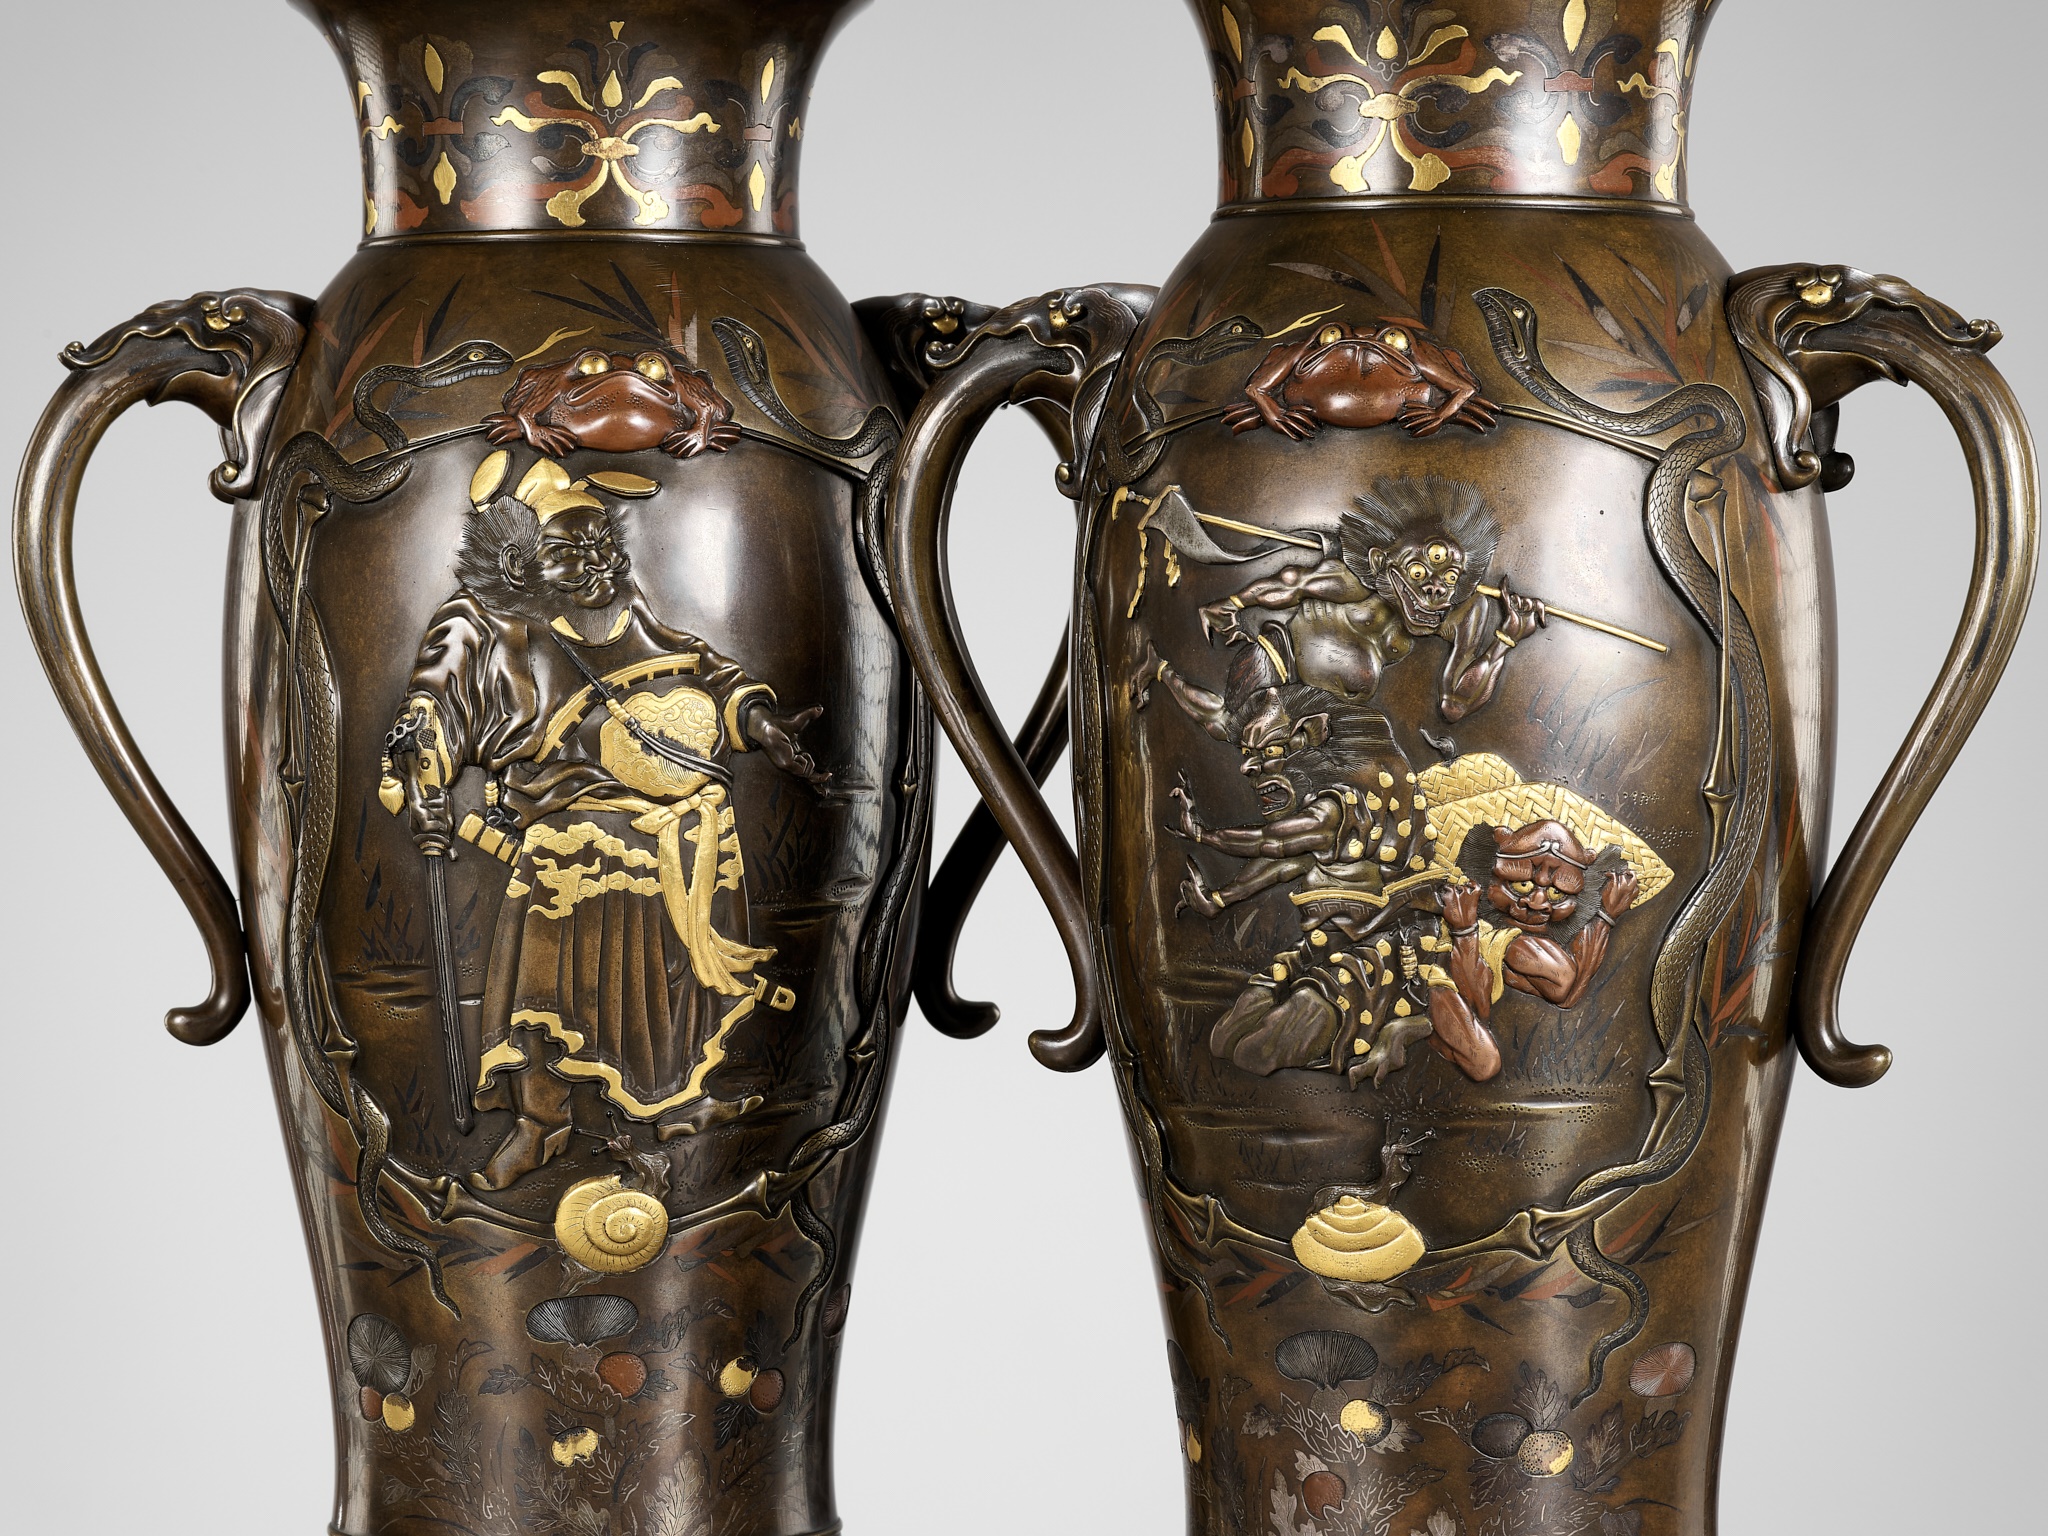 A SUPERB PAIR OF MIYAO-STYLE MIXED-METAL-INLAID AND PARCEL-GILT BRONZE VASES WITH SHOKI AND ONI